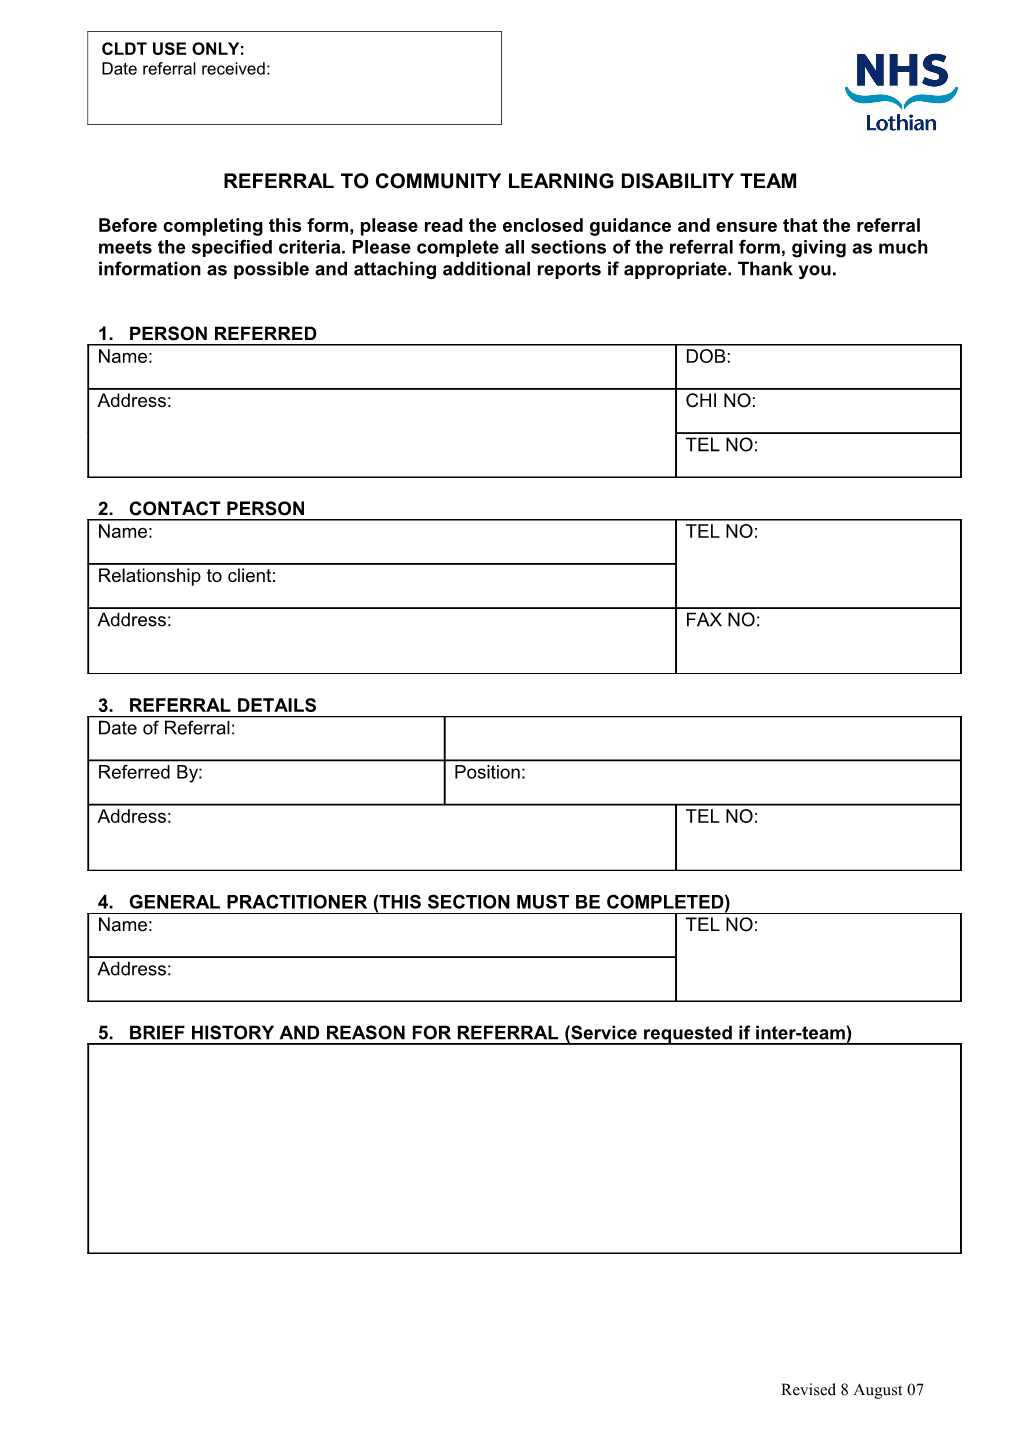 Referral Form to Community Learning Disability Team